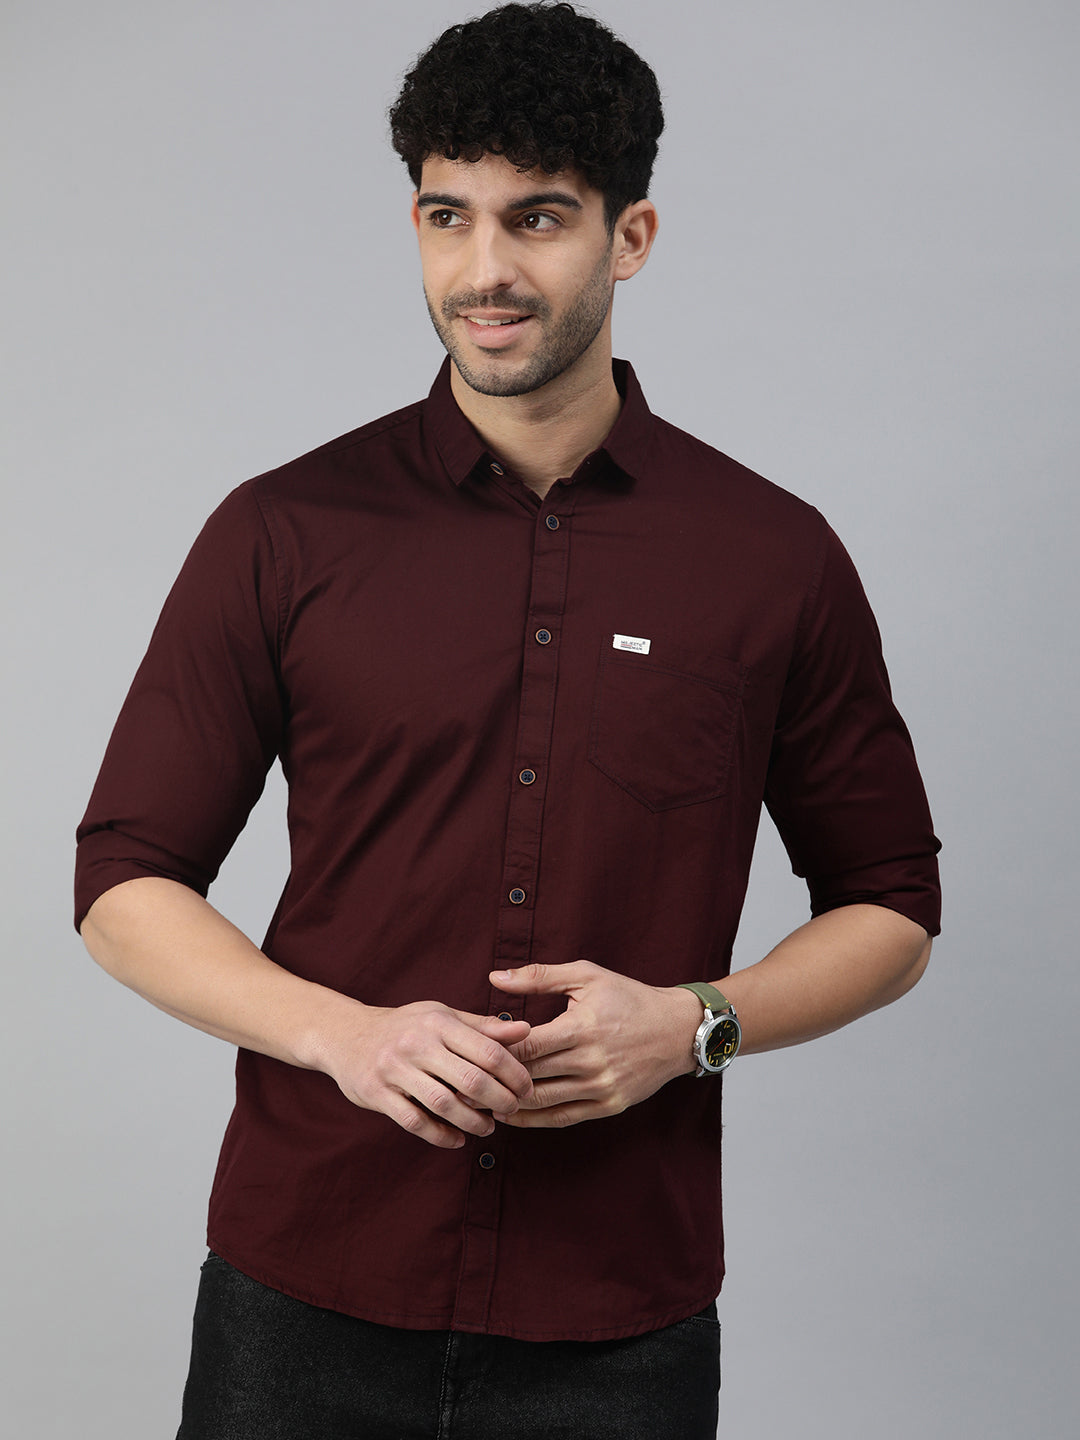 Majestic Man Comfort Slim Fit Solid Cotton Casual Shirt - Wine